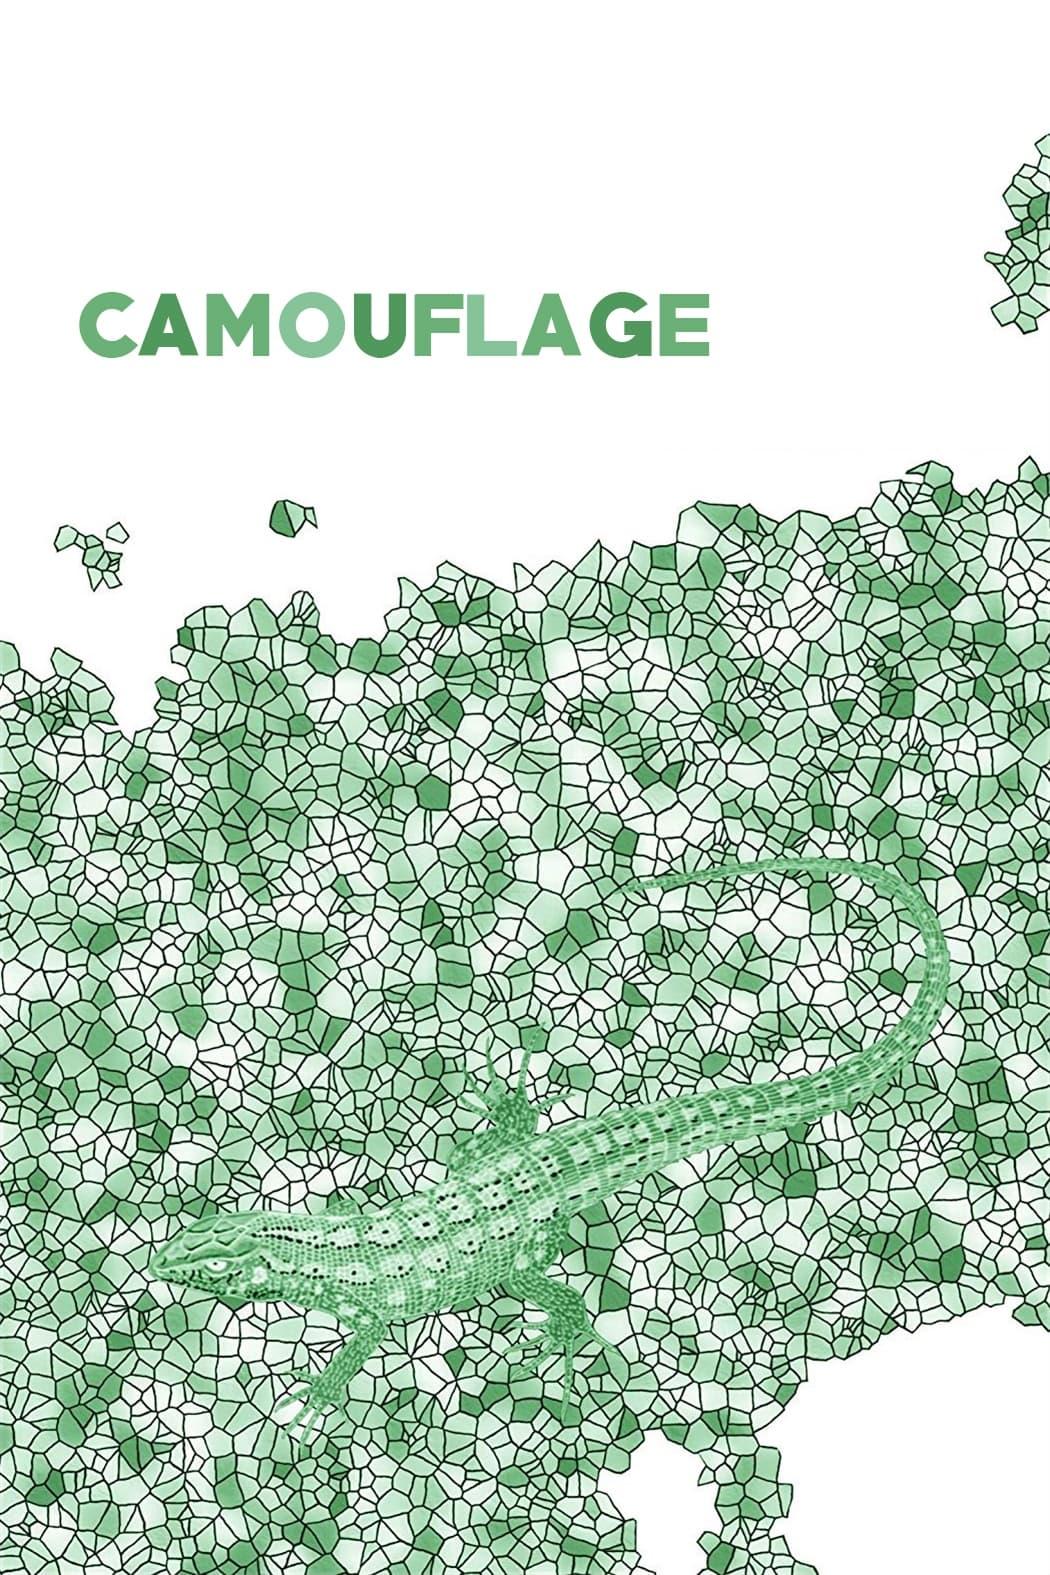 Camouflage poster